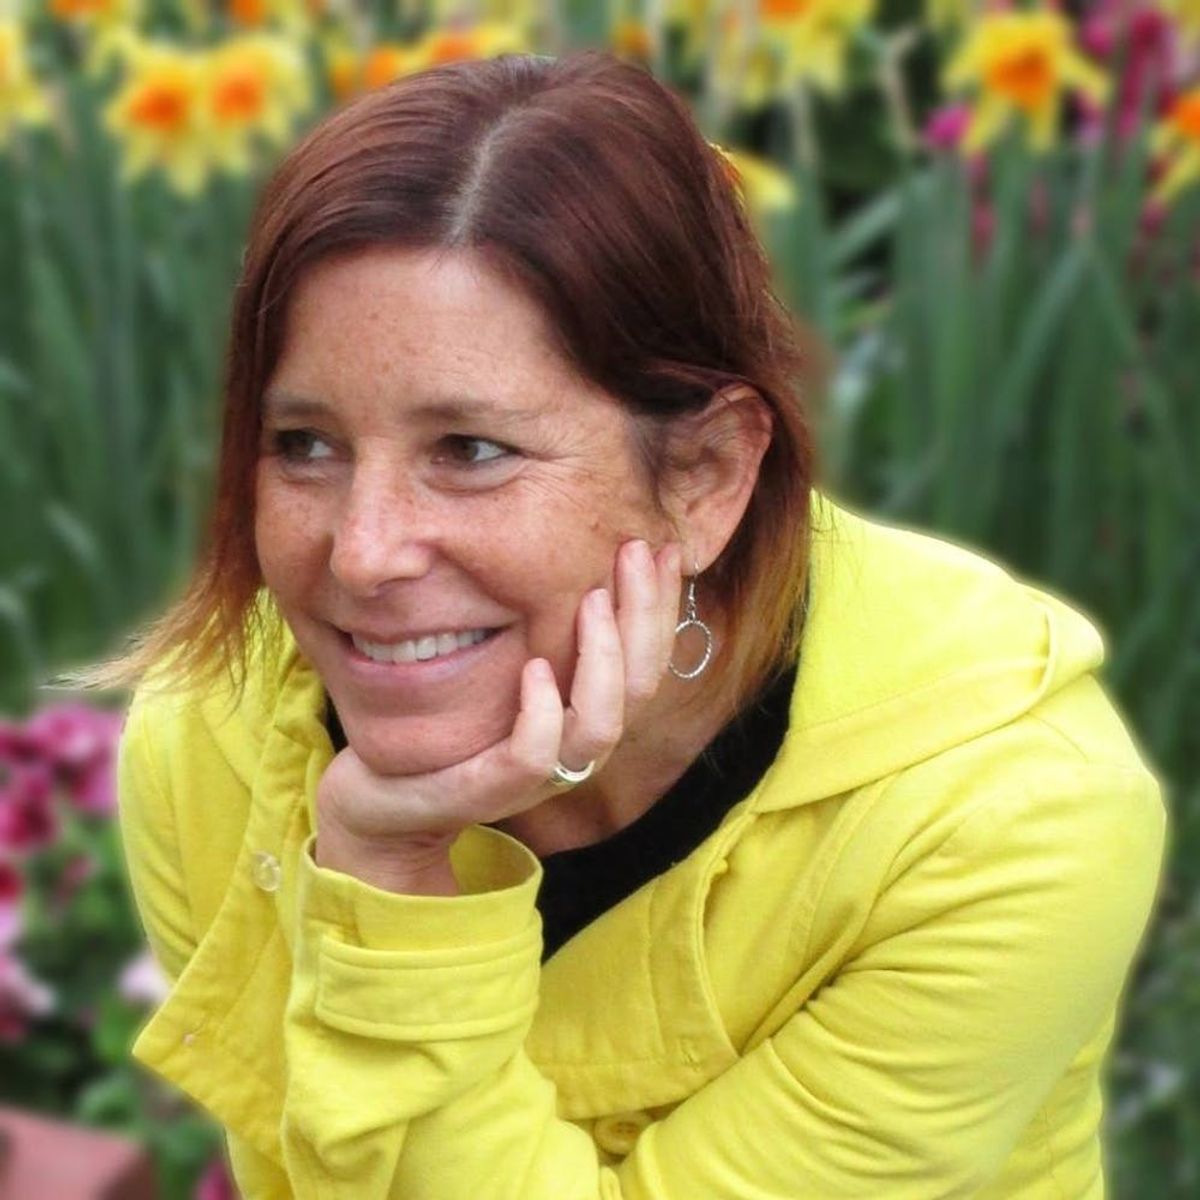 Children’s Author Amy Krouse Rosenthal Has Passed Away After Her Battle With Ovarian Cancer